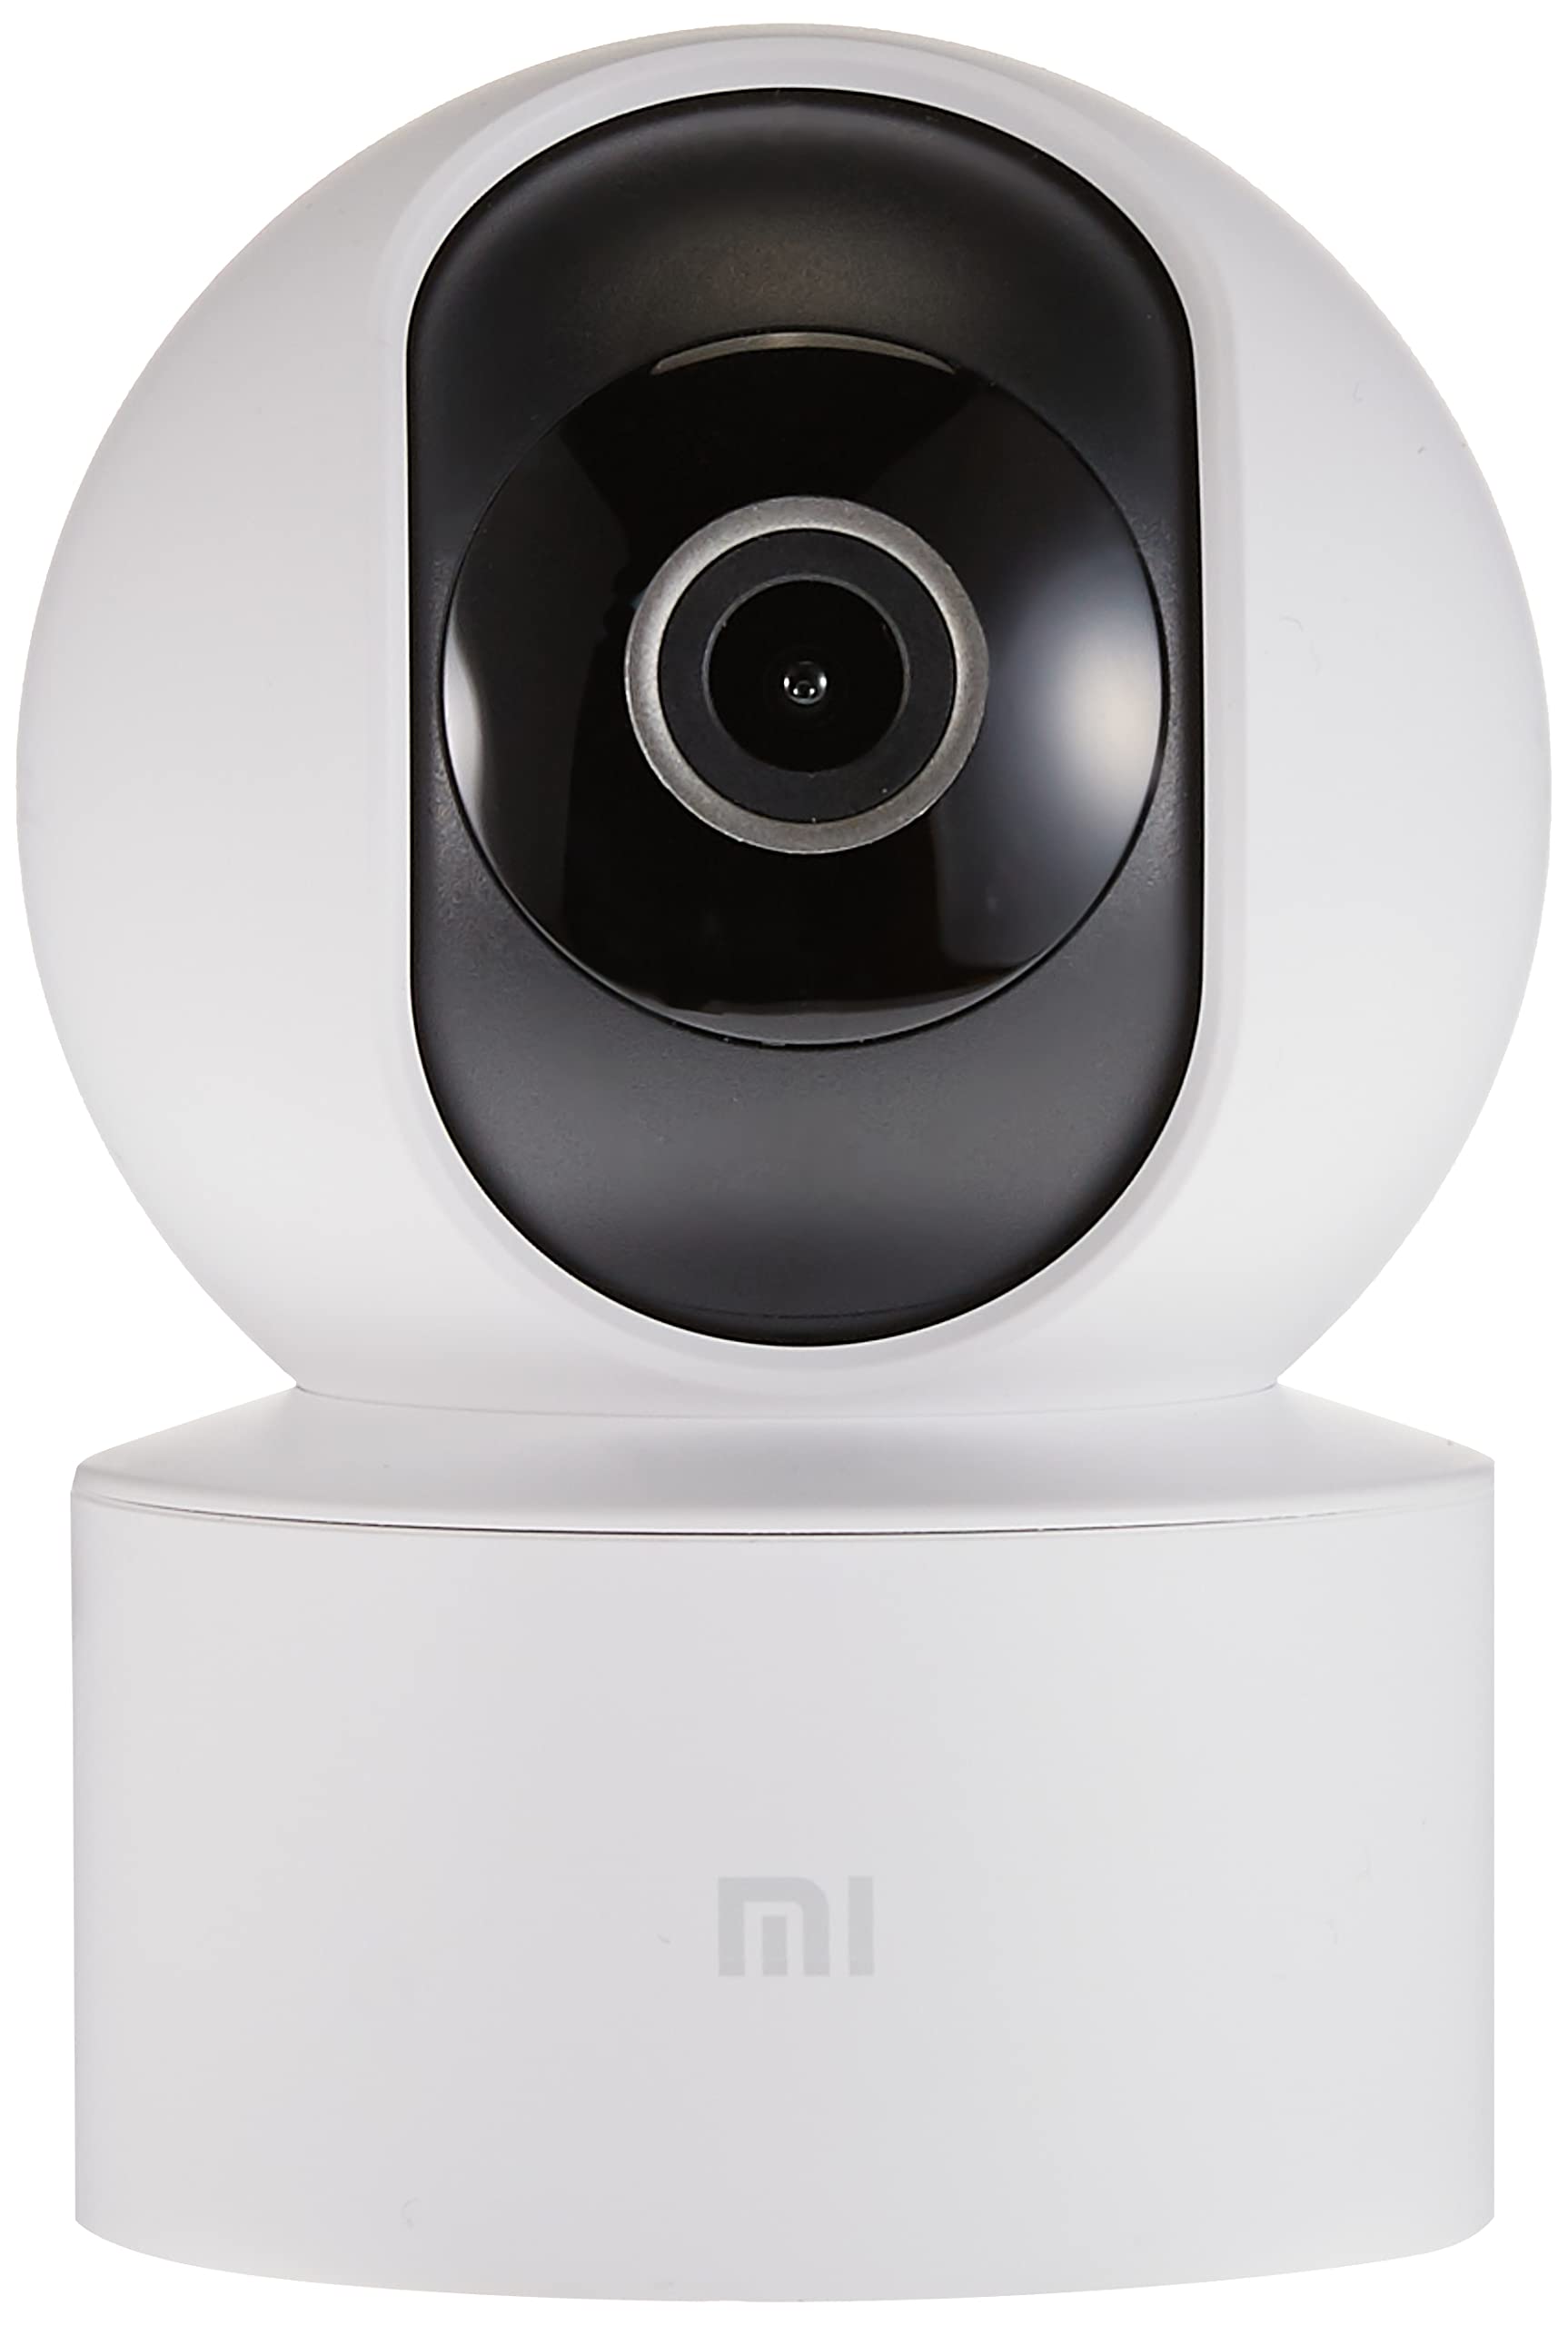 Xiaomi Mi 360 Degree Camera 1080P 360 Degree Panoramic View, Full Protection Infrared Night Vision Ai Human Detection Compatible With Android 4.4, Ios 9.0 And Above White